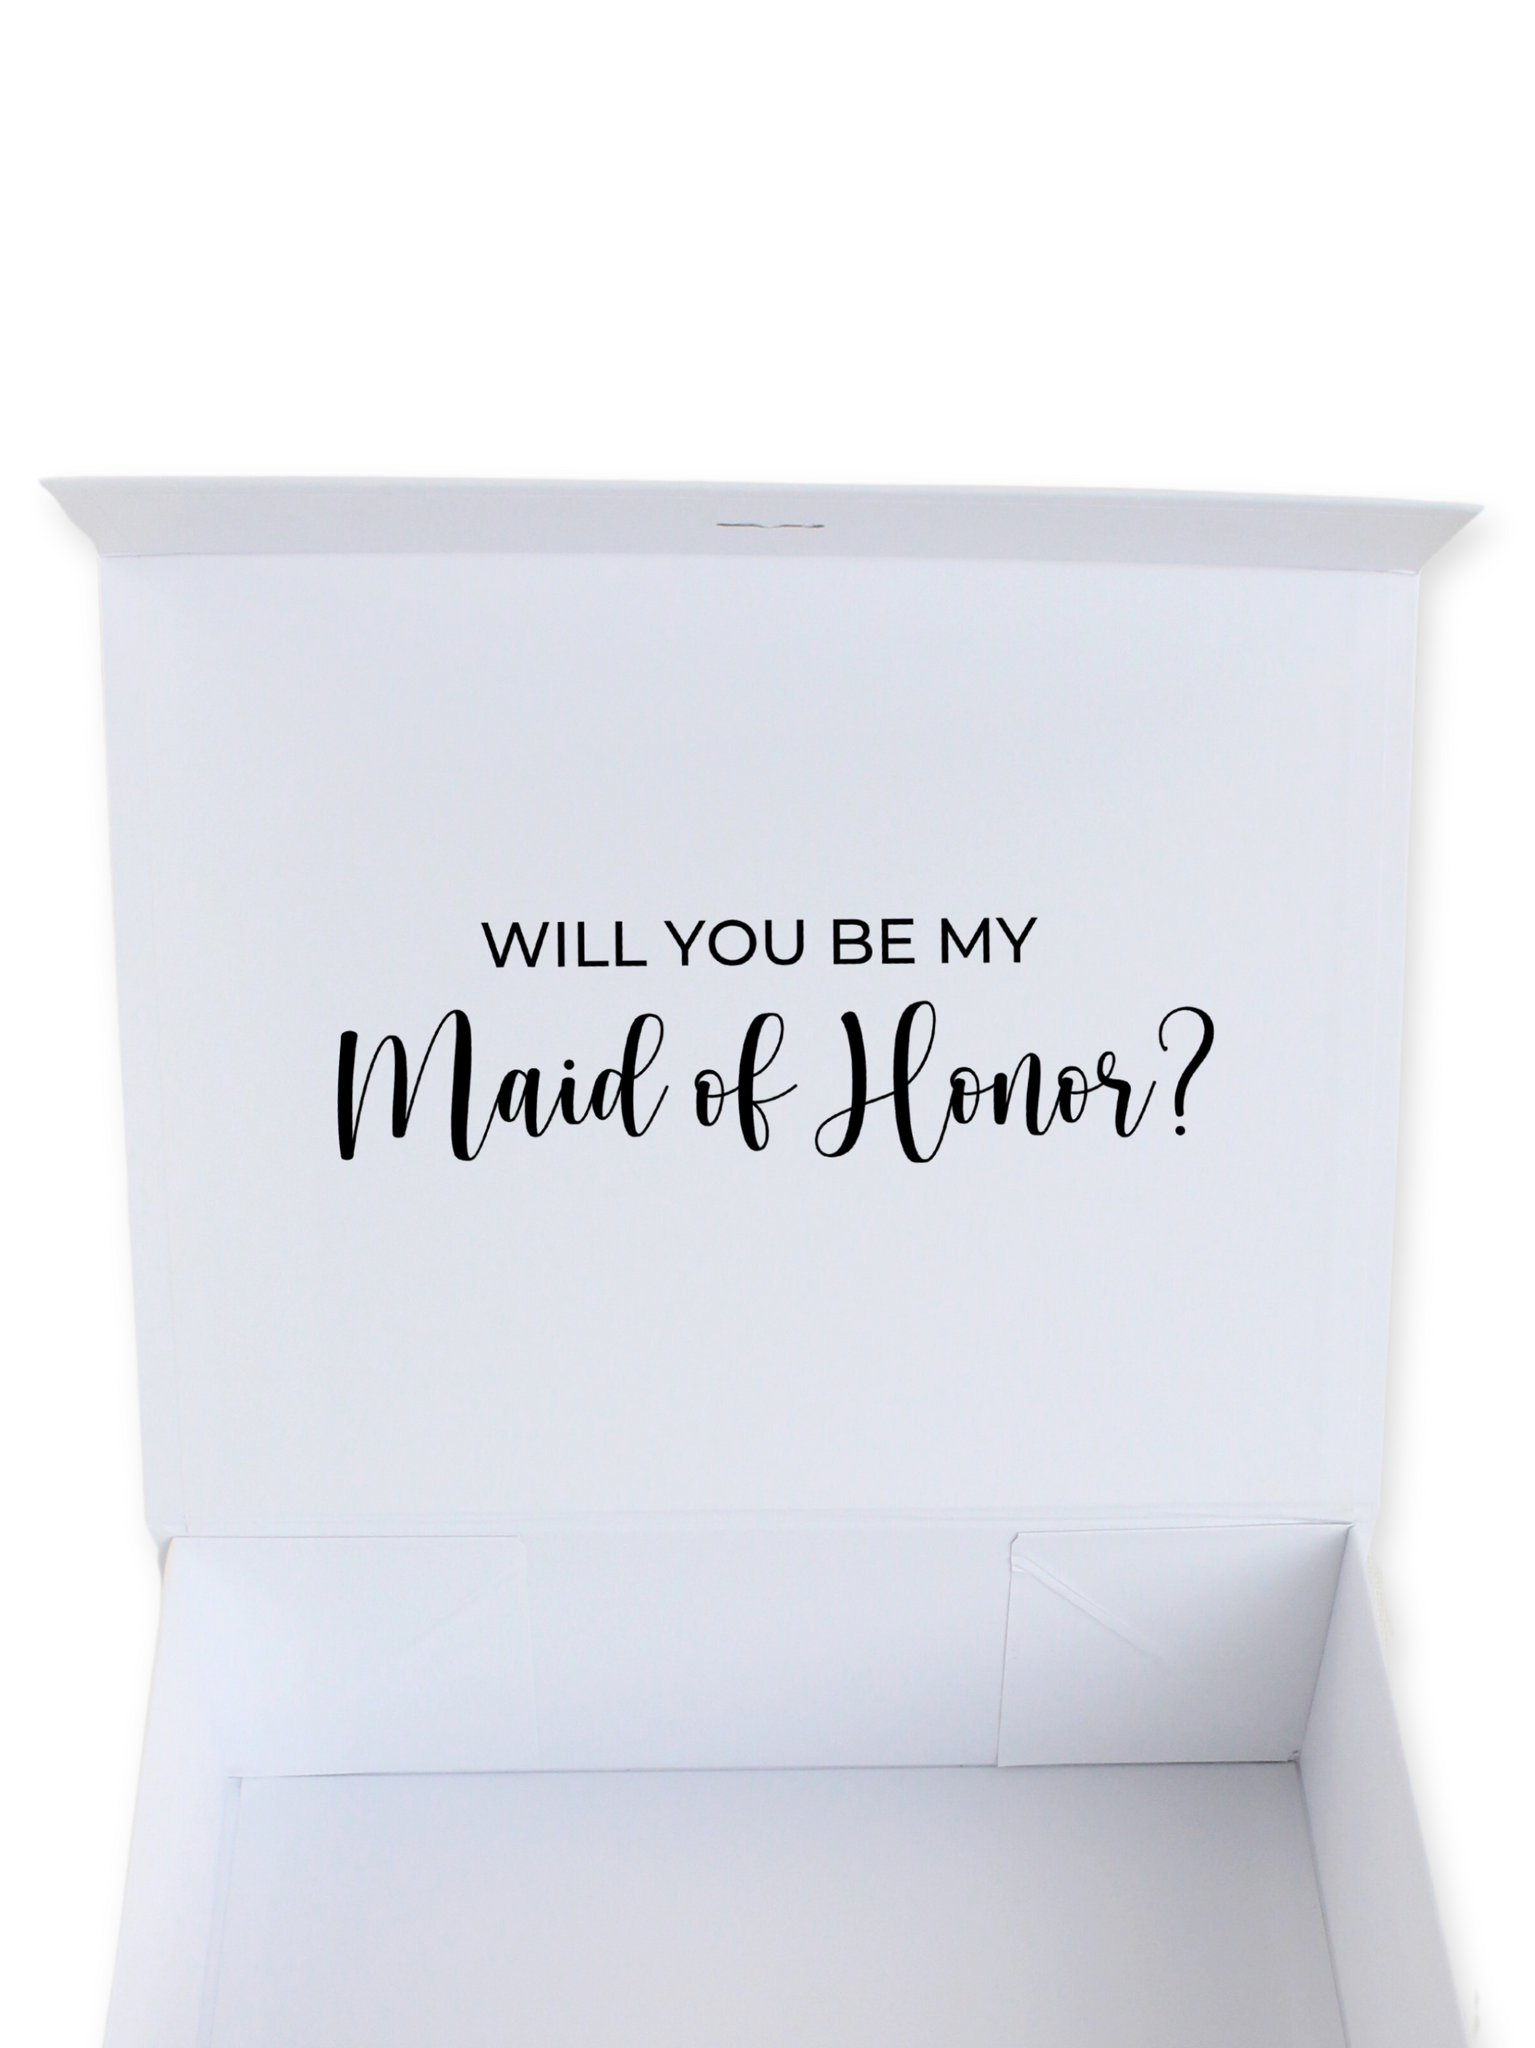 Presentbox Maid of Honor Proposal